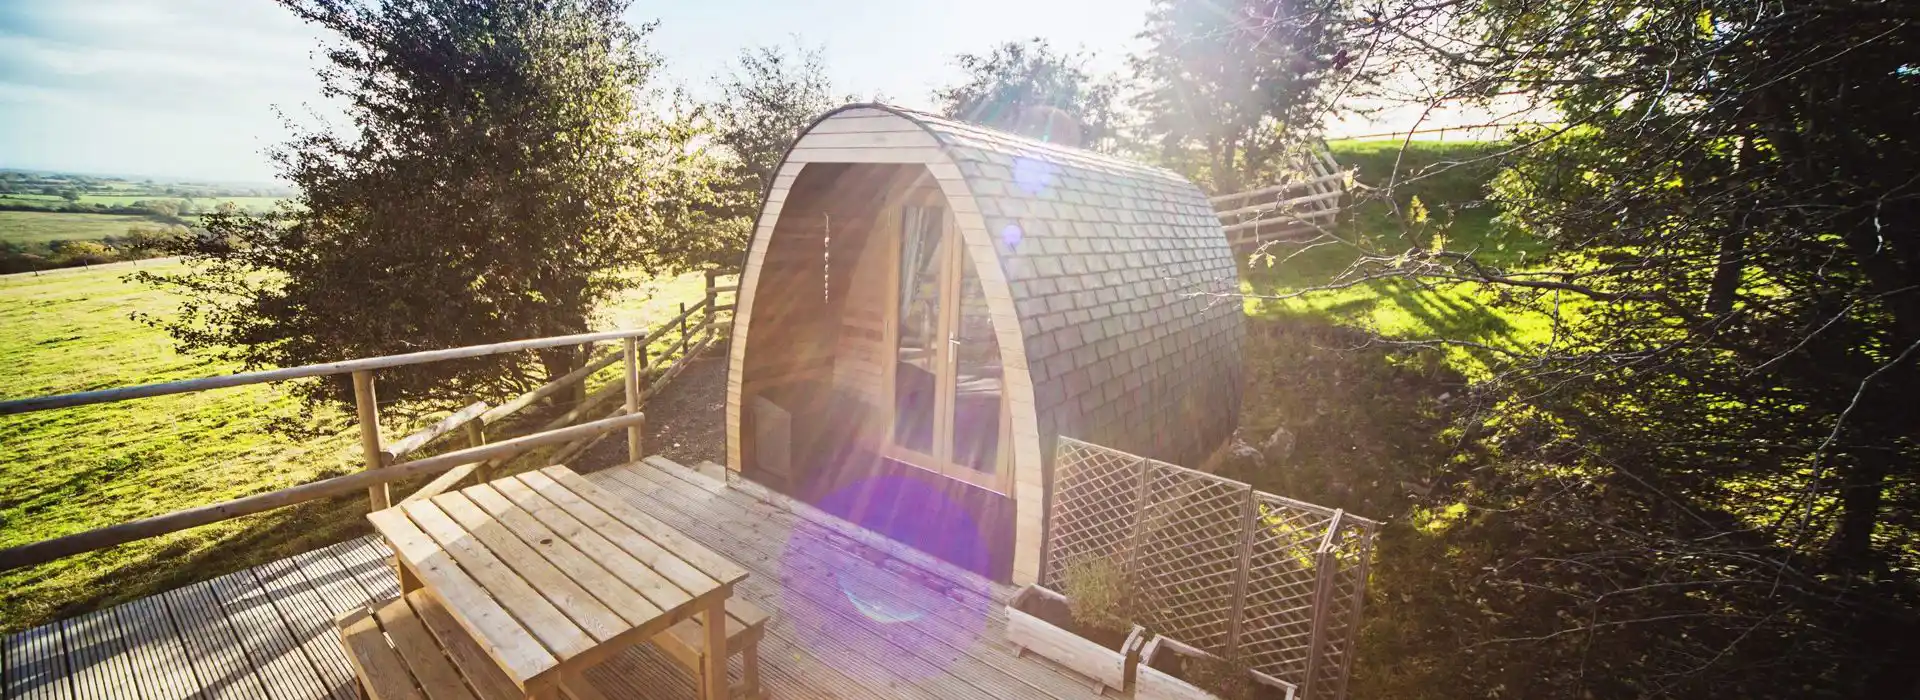 Glamping in the East Midlands